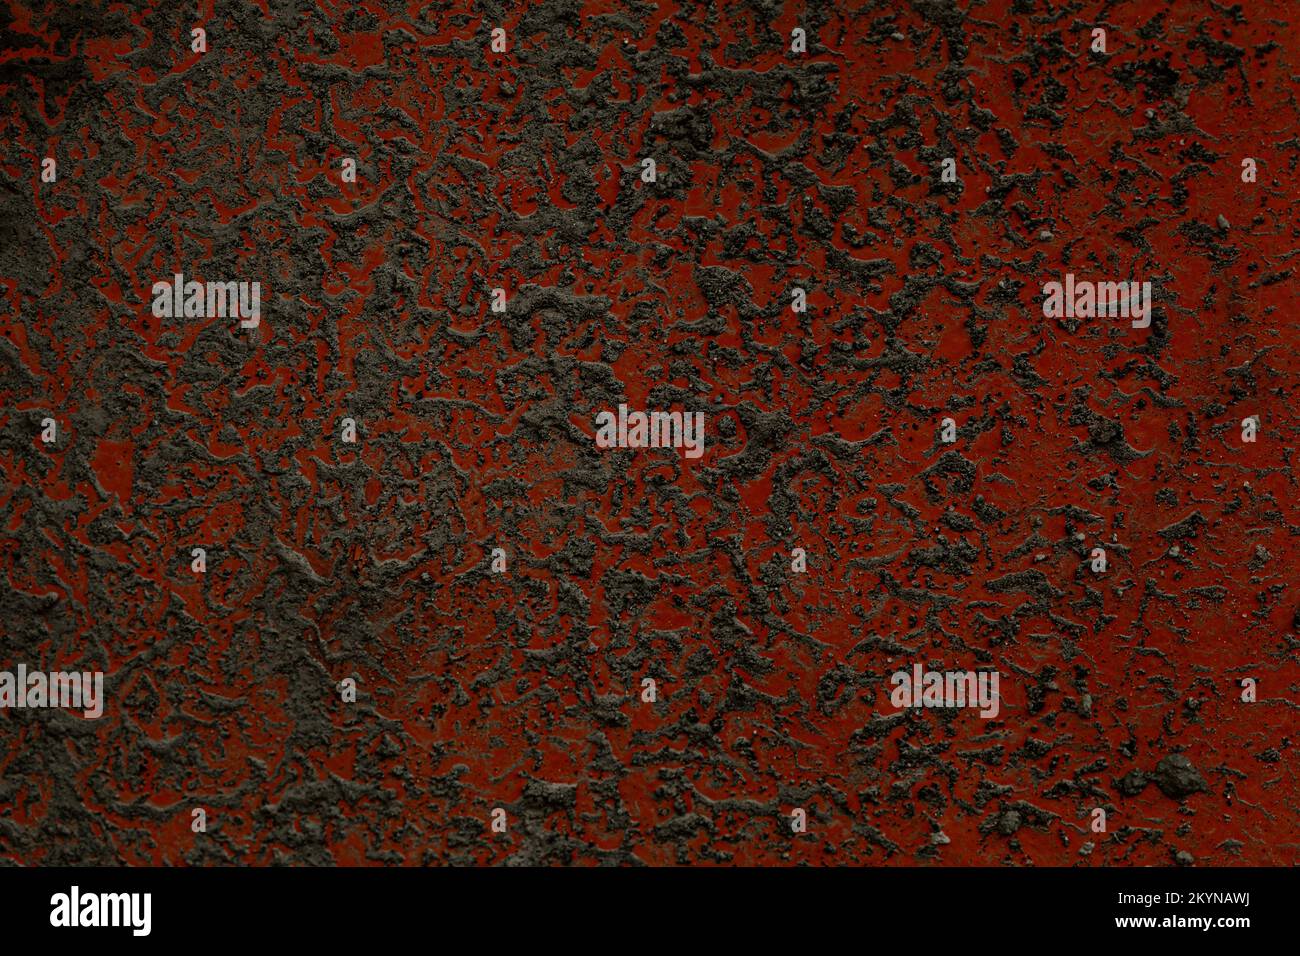 dirt on orange wall abstract grunge background Stock Photo